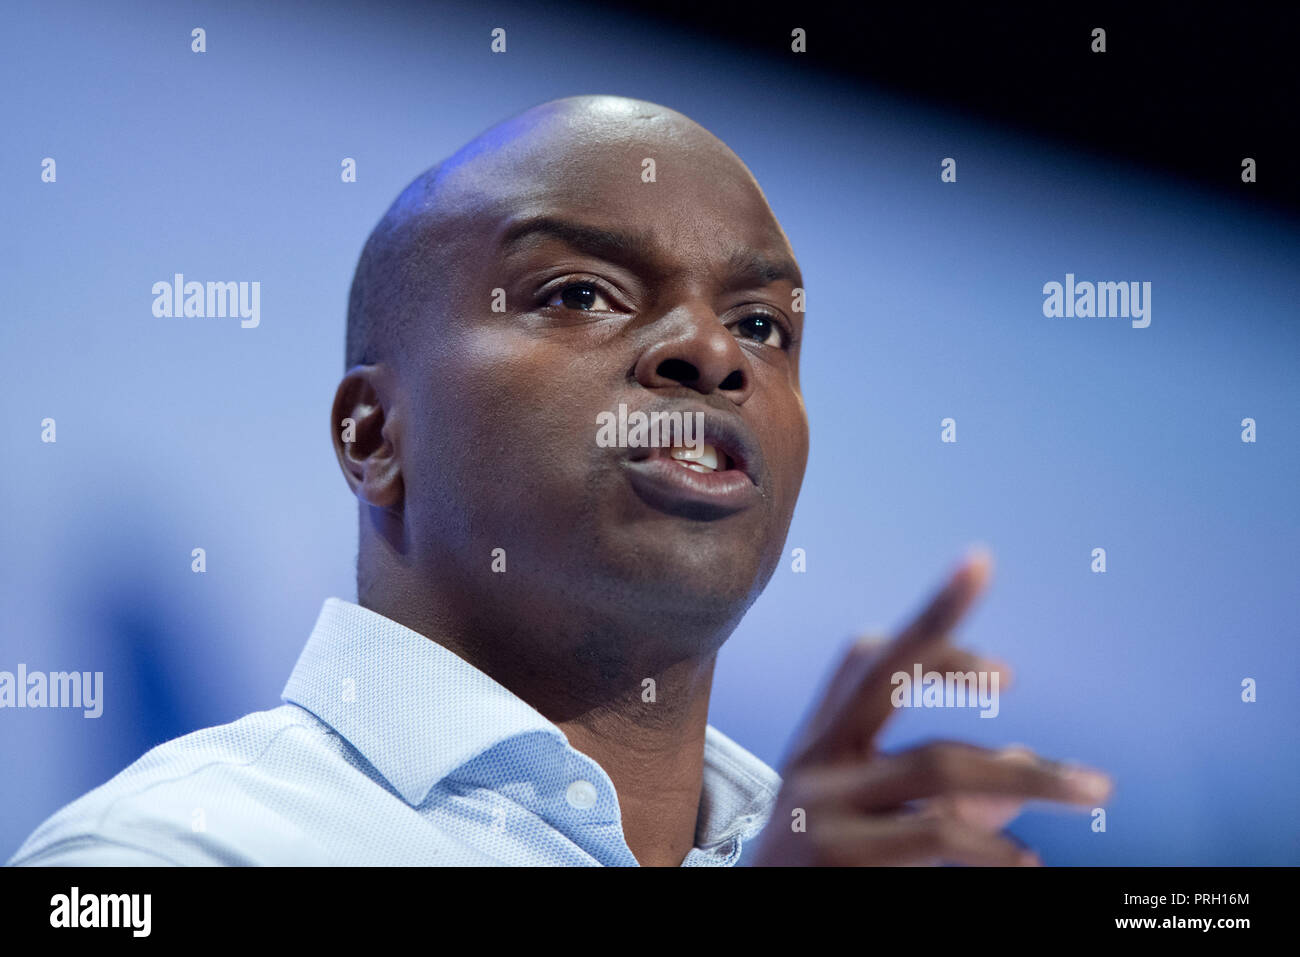 Birmingham, UK. 3rd October 2018. Shaun Bailey, Conservative Candidate for London Mayor, speaks at the Conservative Party Conference in Birmingham. © Russell Hart/Alamy Live News. Stock Photo